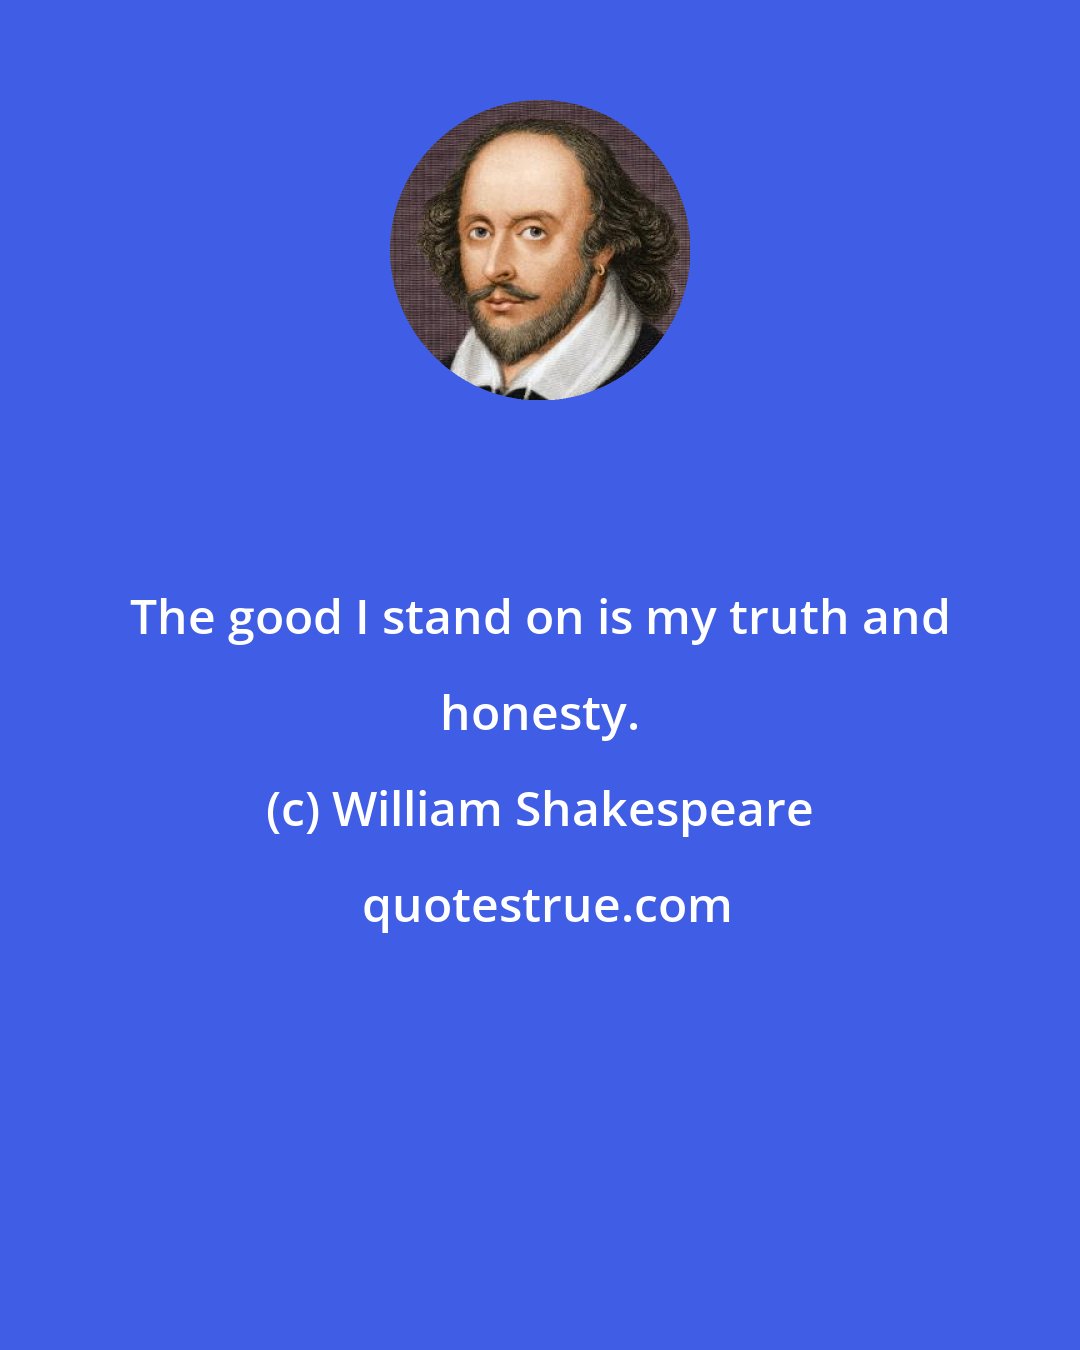 William Shakespeare: The good I stand on is my truth and honesty.